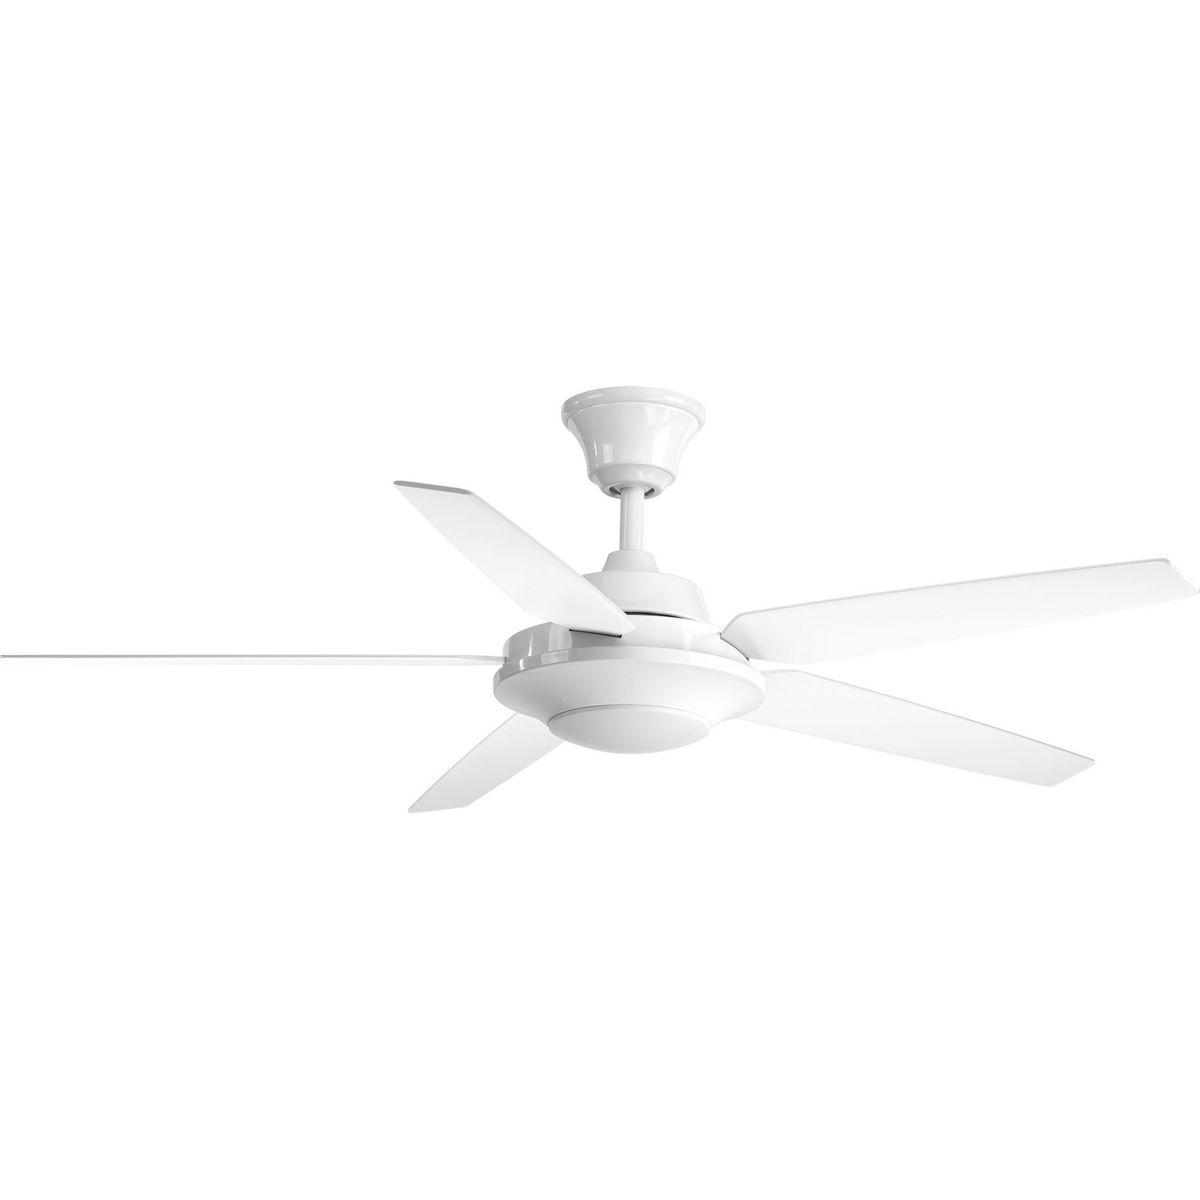 Hubbell P2539-3030K Five-blade 54 inch Signature Plus II ceiling fan with five blades in a white finish. The LED light source, offering both form and function with energy- and cost-savings benefits, contains a white opal shatterproof shade and is comprised of a 17W dimmable 